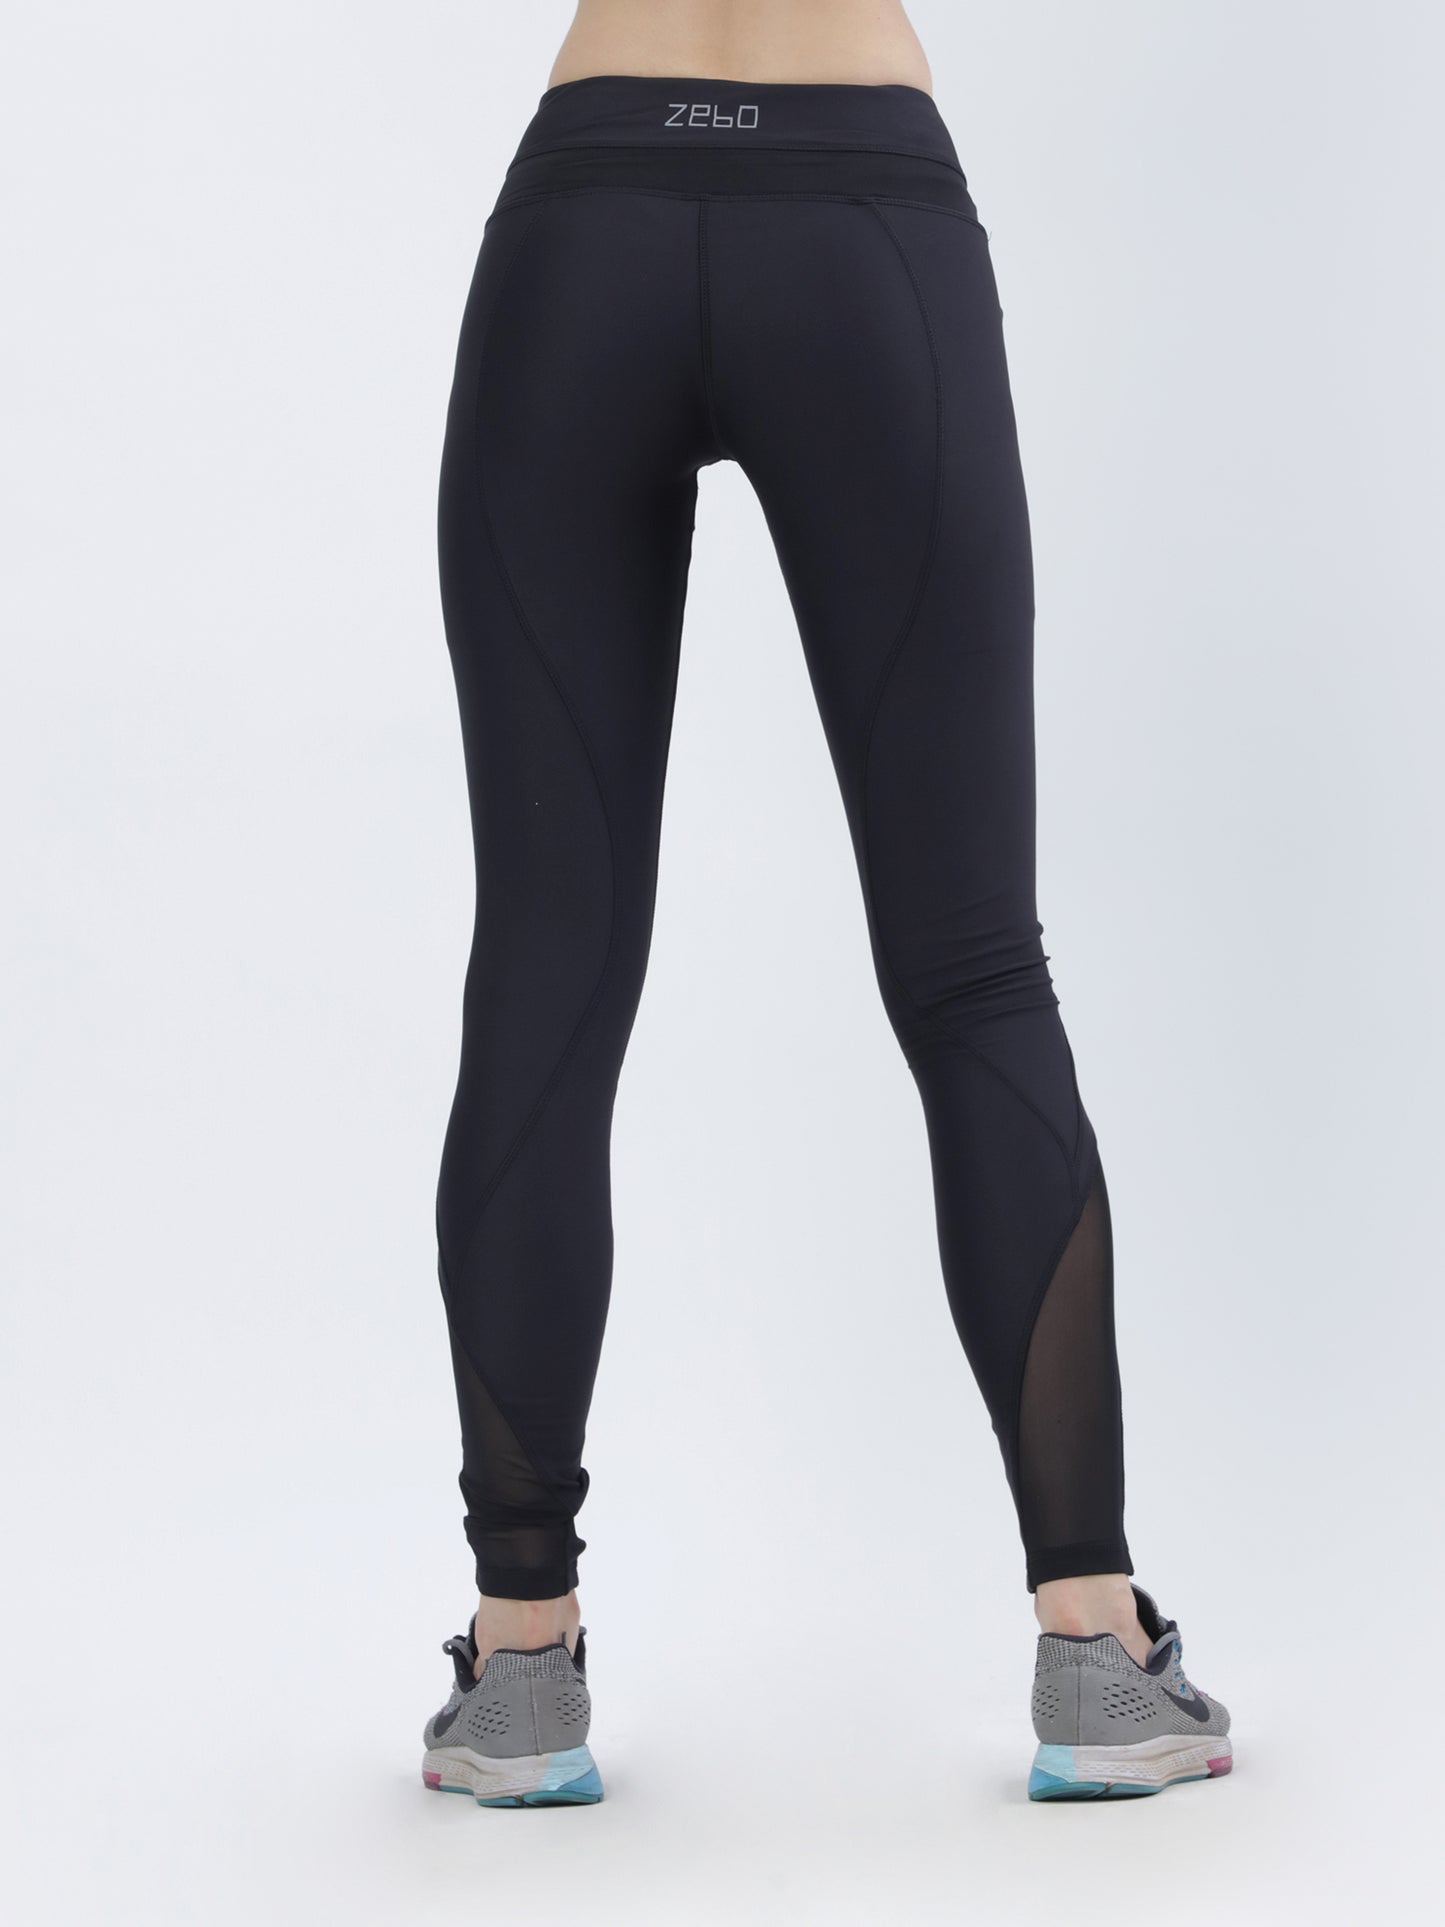 Anti-bacterial quick dry leggings with side breathable mesh & side pocket with zip - Zebo Active Wear